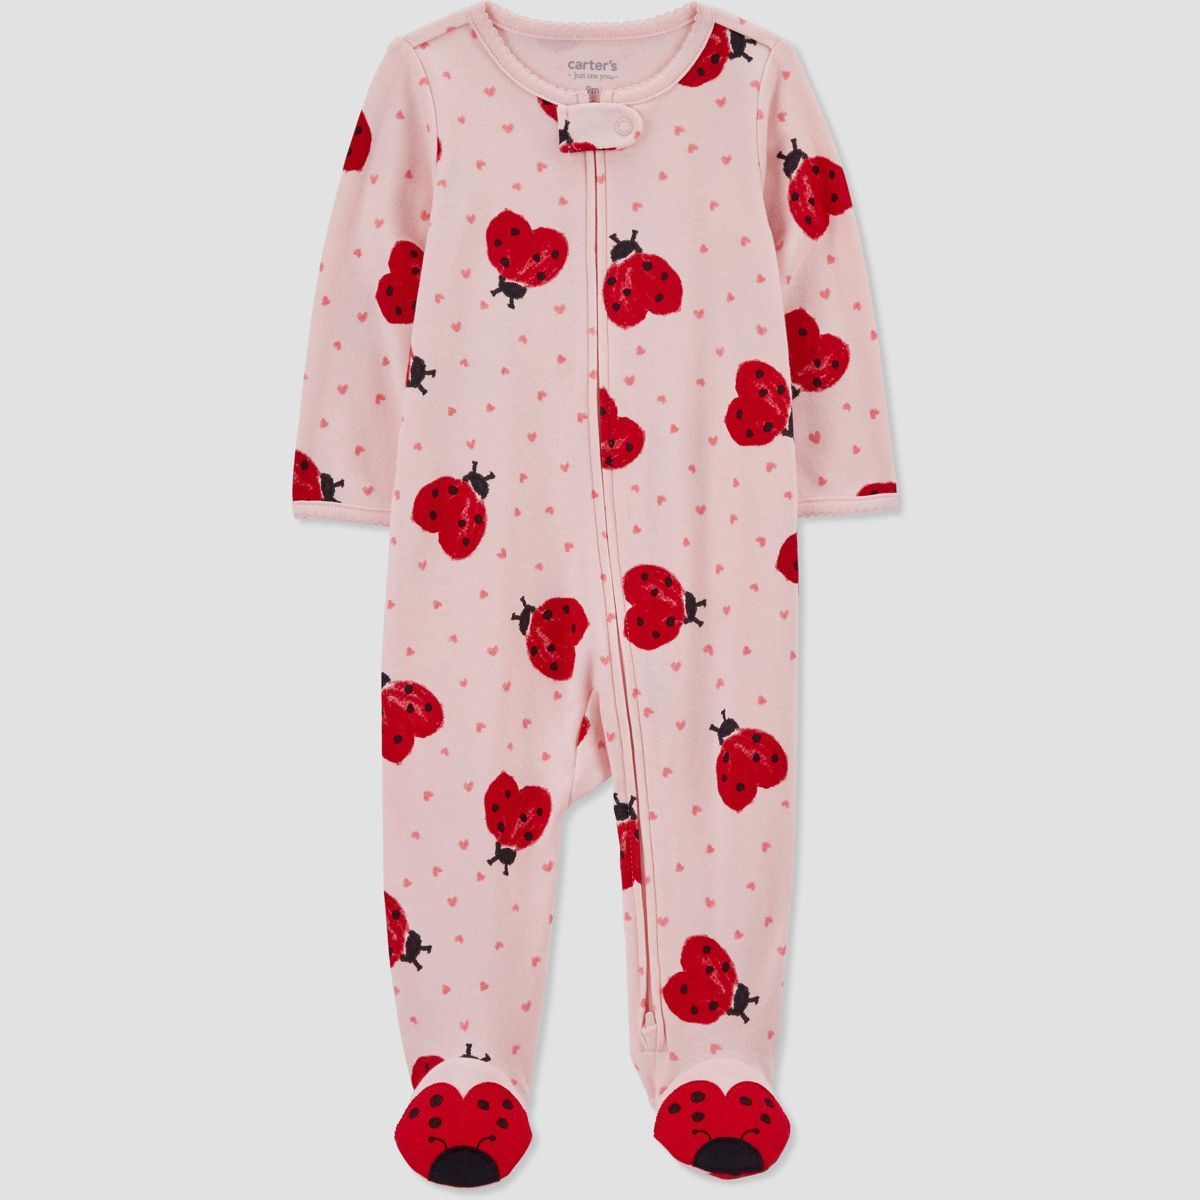 Carter's Just One You®️ Baby Girls' Ladybug Footed Pajama - Pink | Target